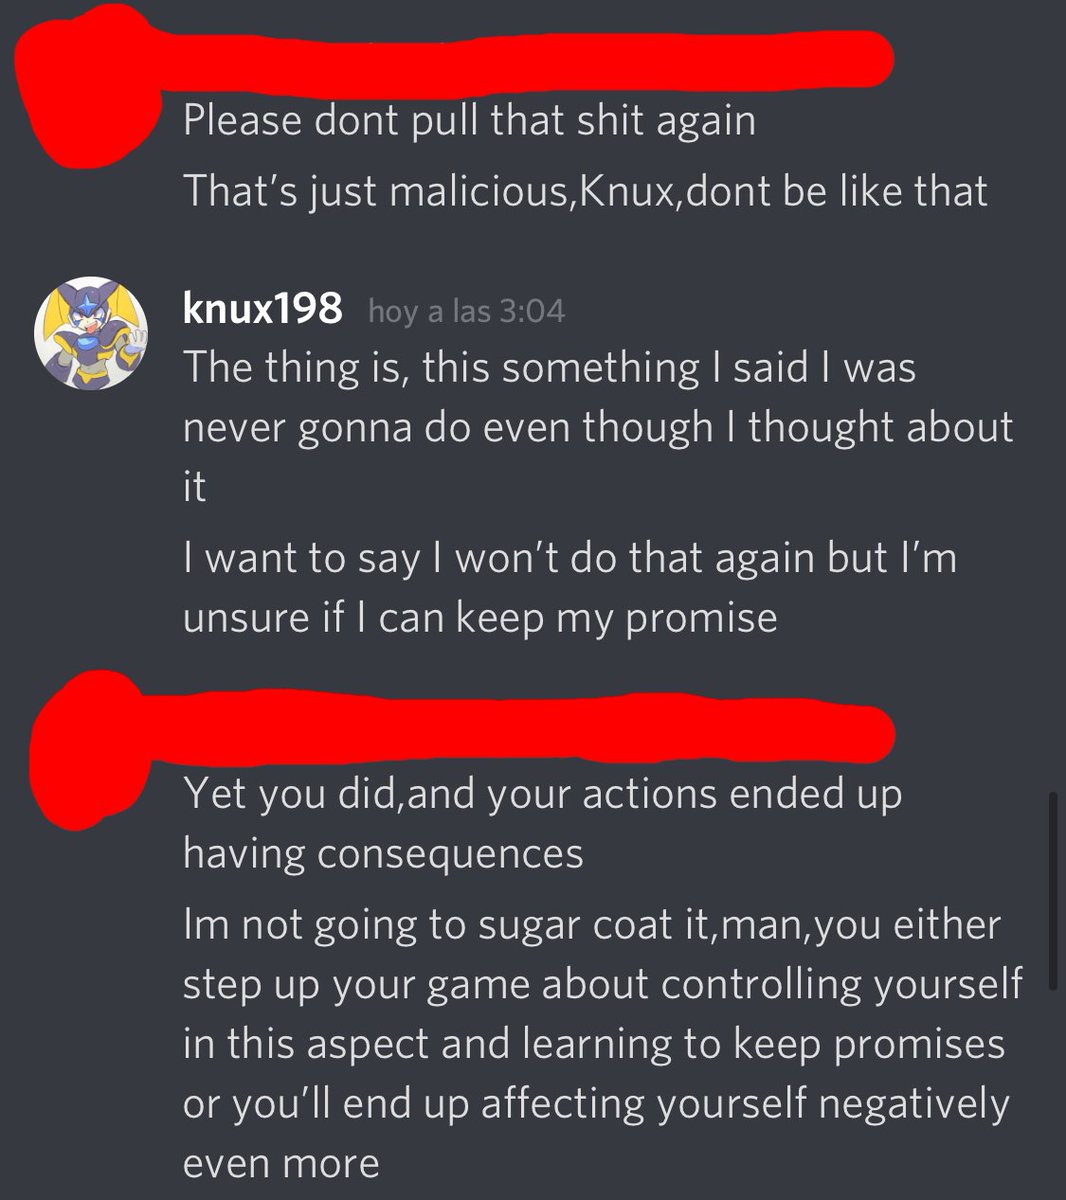 He even admits as much here in these logs provided to me from a user who wishes to remain anonymous. Knux198 made several slanderous accusations about me, up to and including accusing me of being a pedophile. Why would he do something like this you ask? Well let me explain.